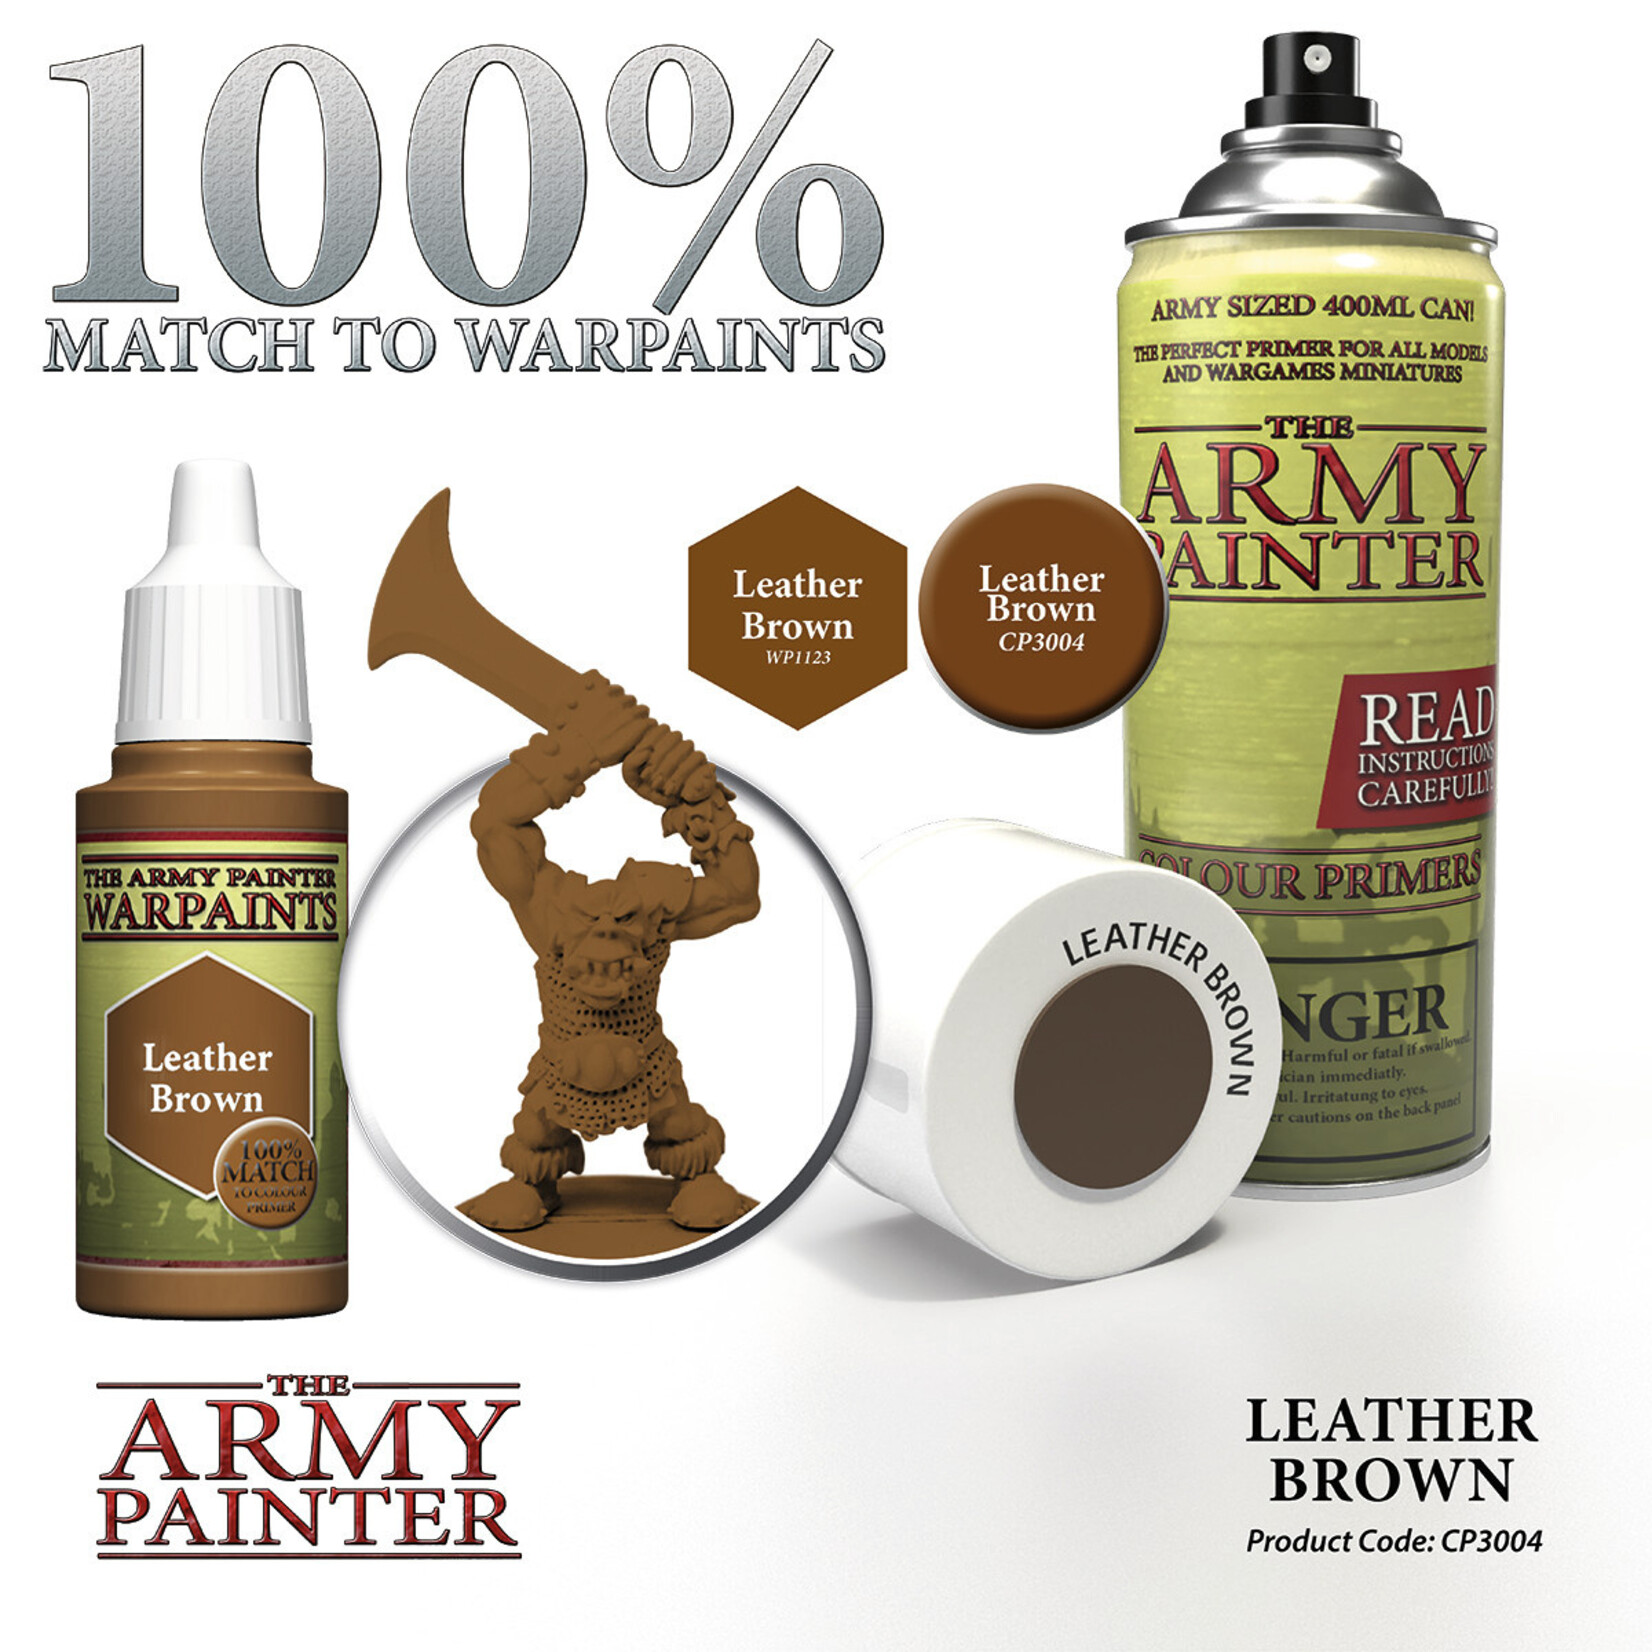 The Army Painter Color Primer Leather Brown